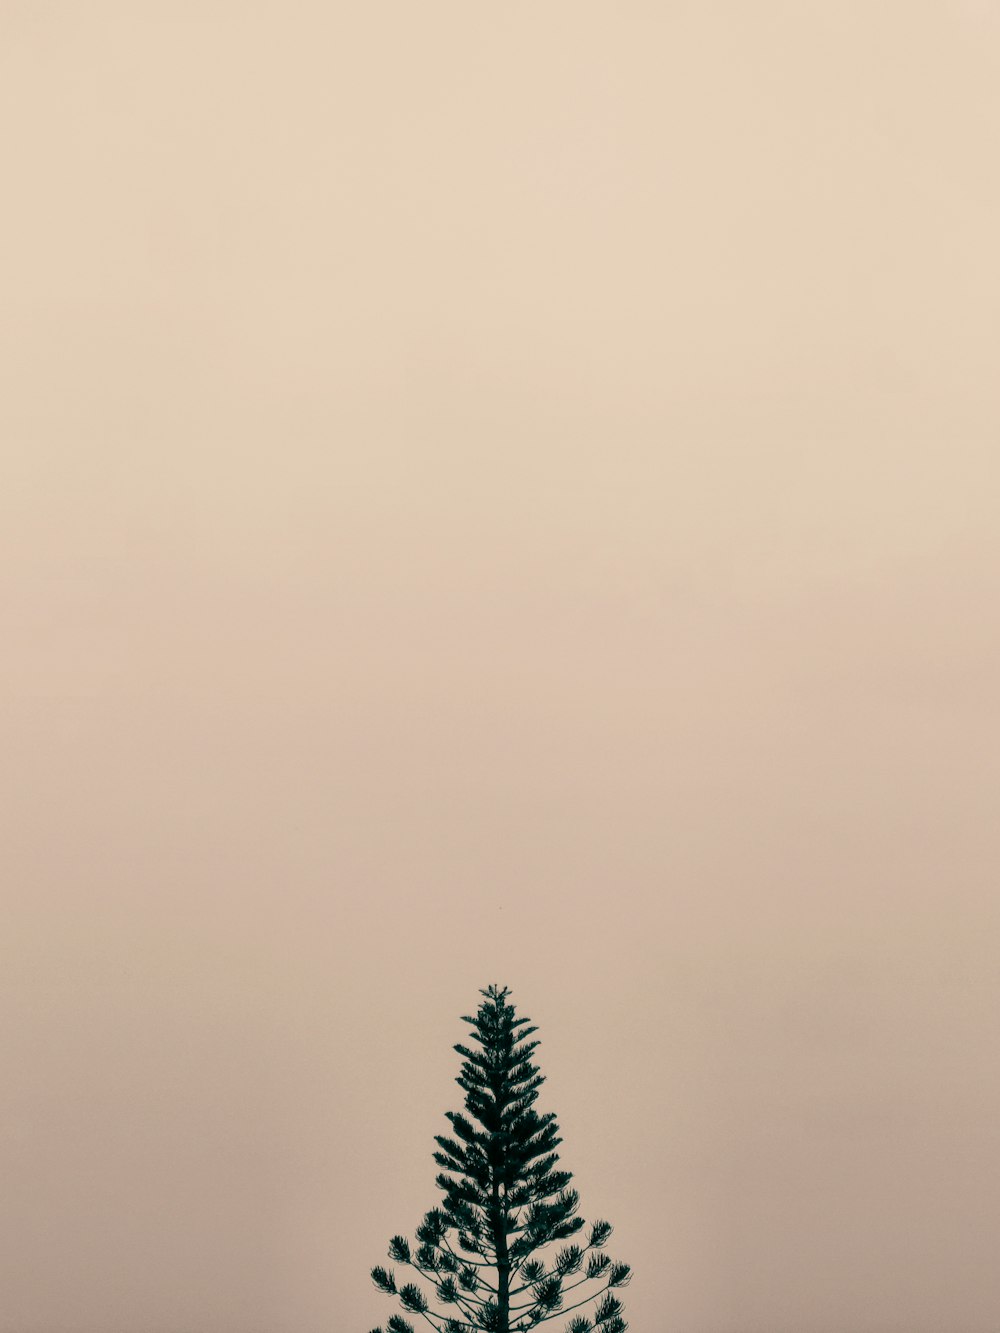 a lone pine tree stands in a field